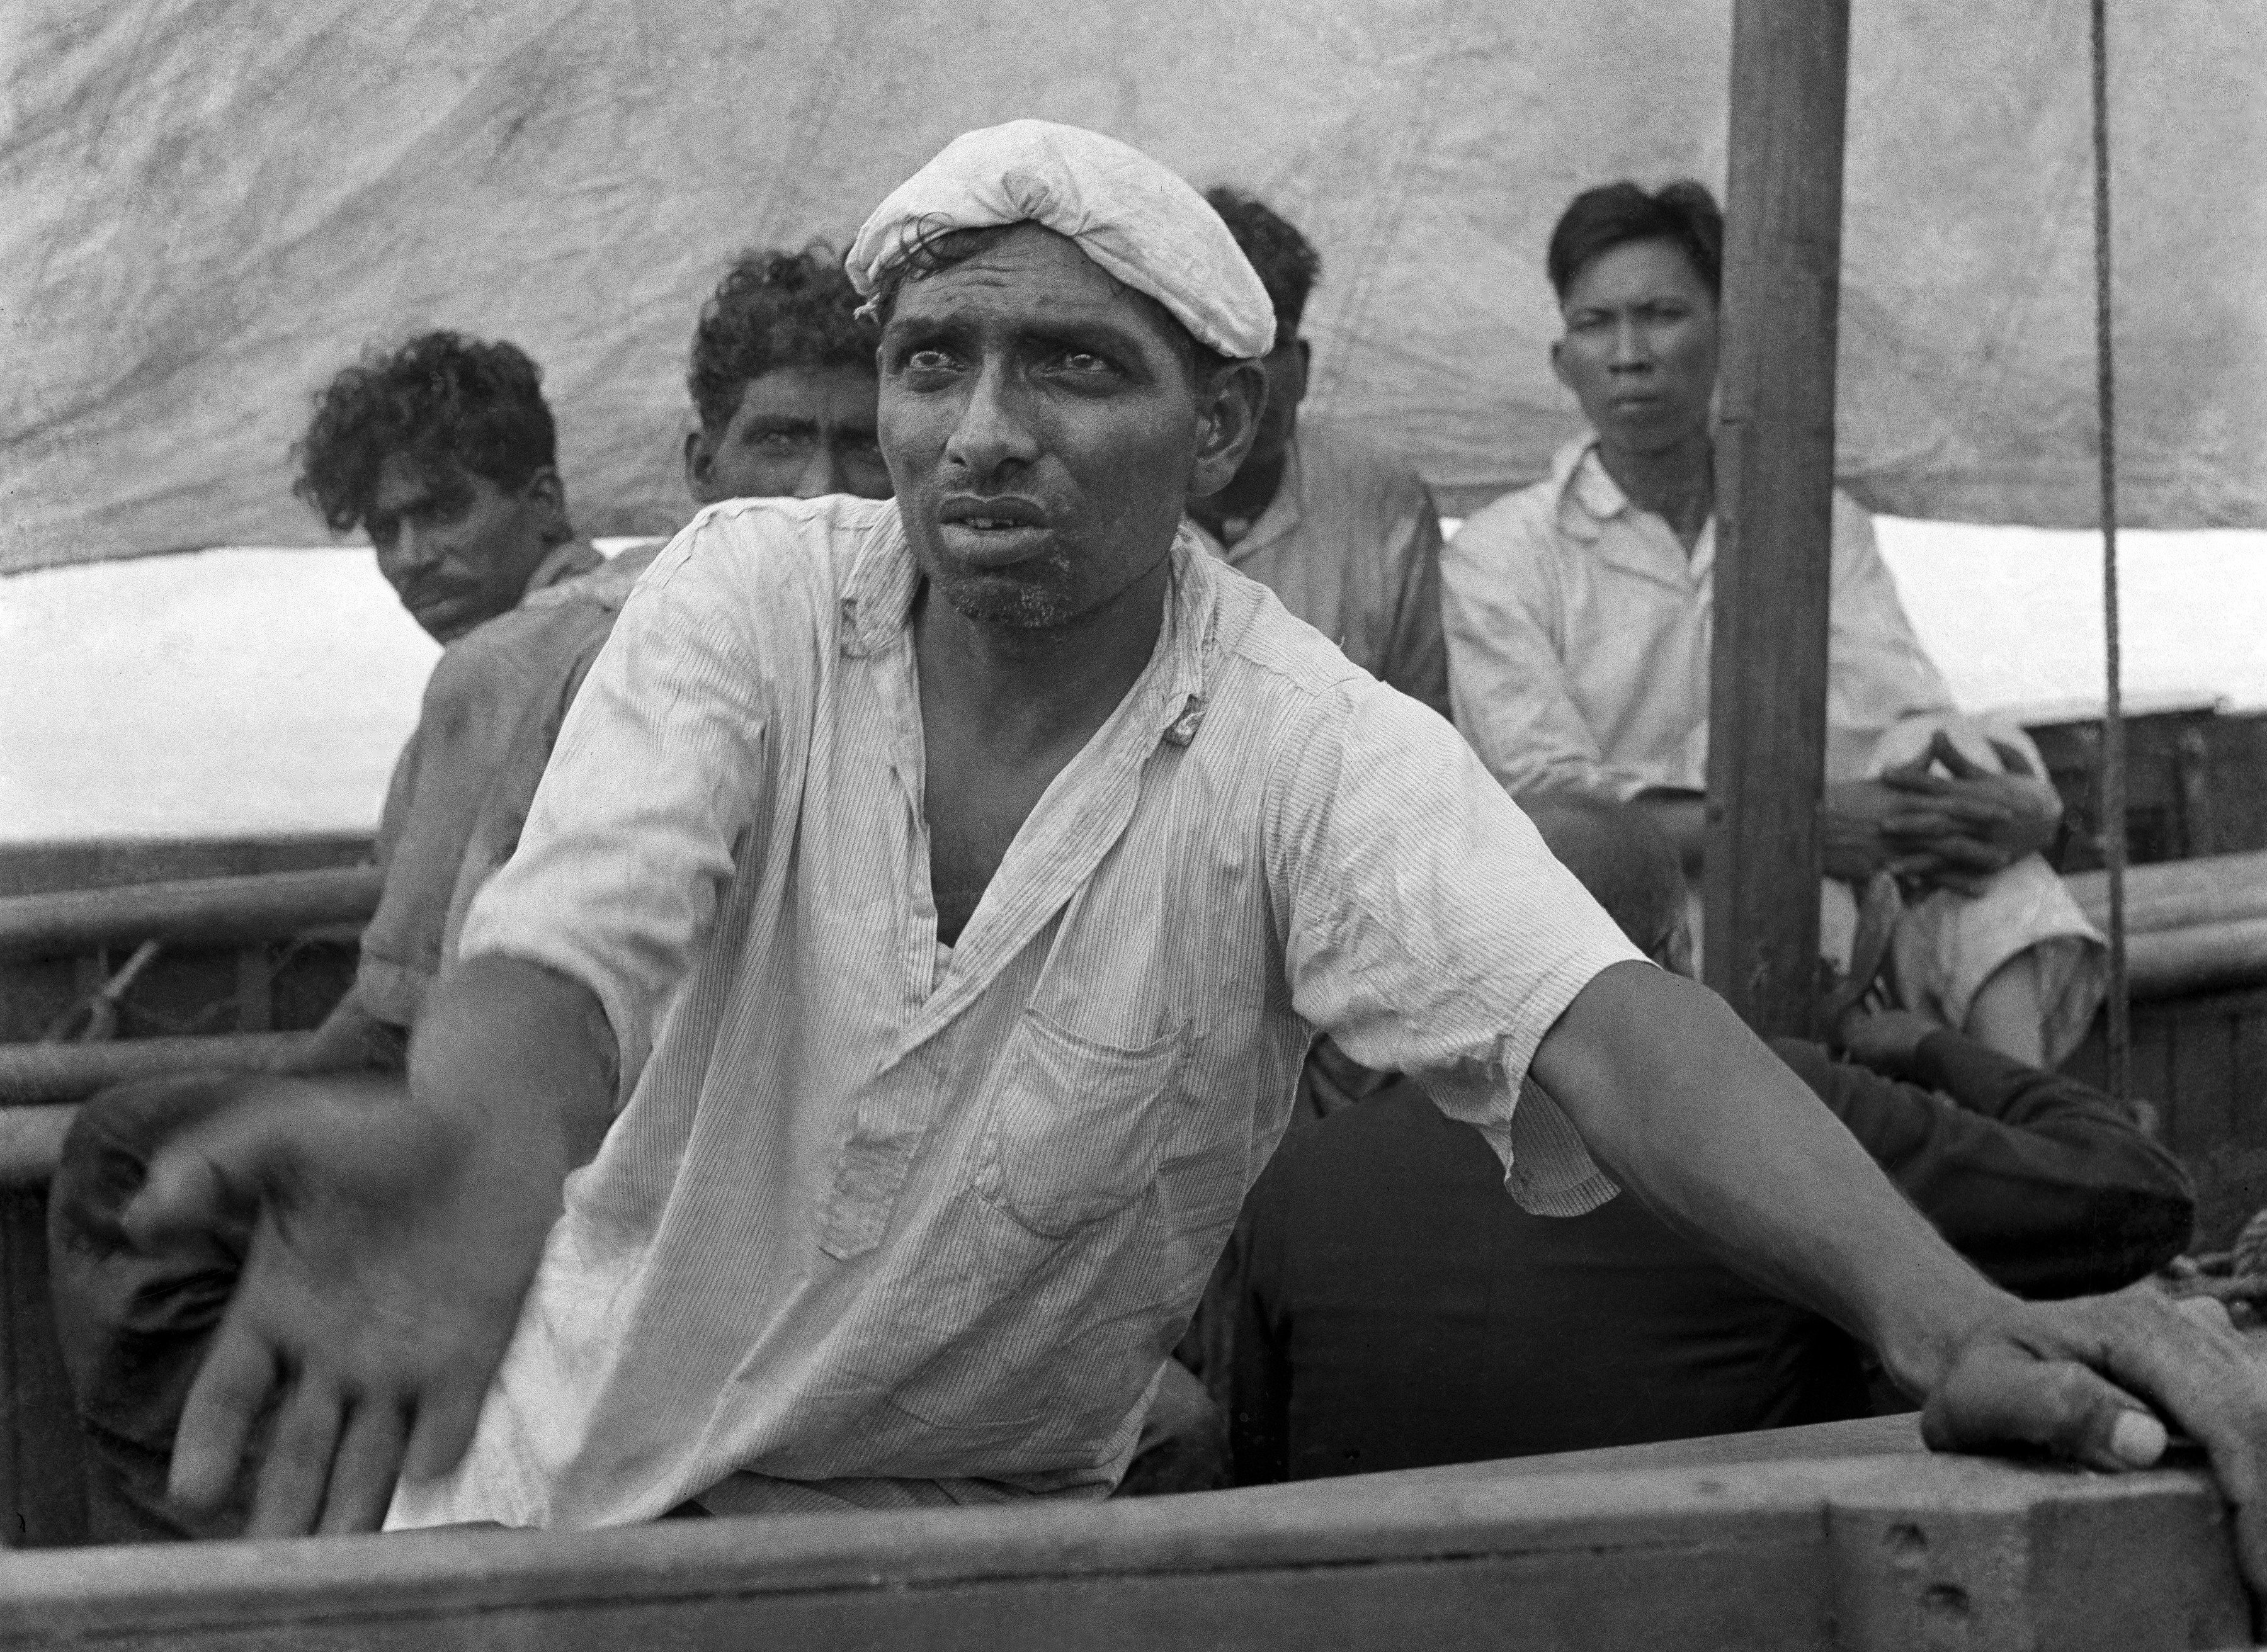  An Indian sailor pleads for water from a lifeboat adrift on the Indian Ocean in January 1942. AP photographer Frank "Pappy" Noel shot this photo from his own lifeboat after a Japanese torpedo sank a ship carrying Noel and others from Singapore. Noel and his fellow survivors eventually reached Sumatra. (AP Photo/Frank Noel)